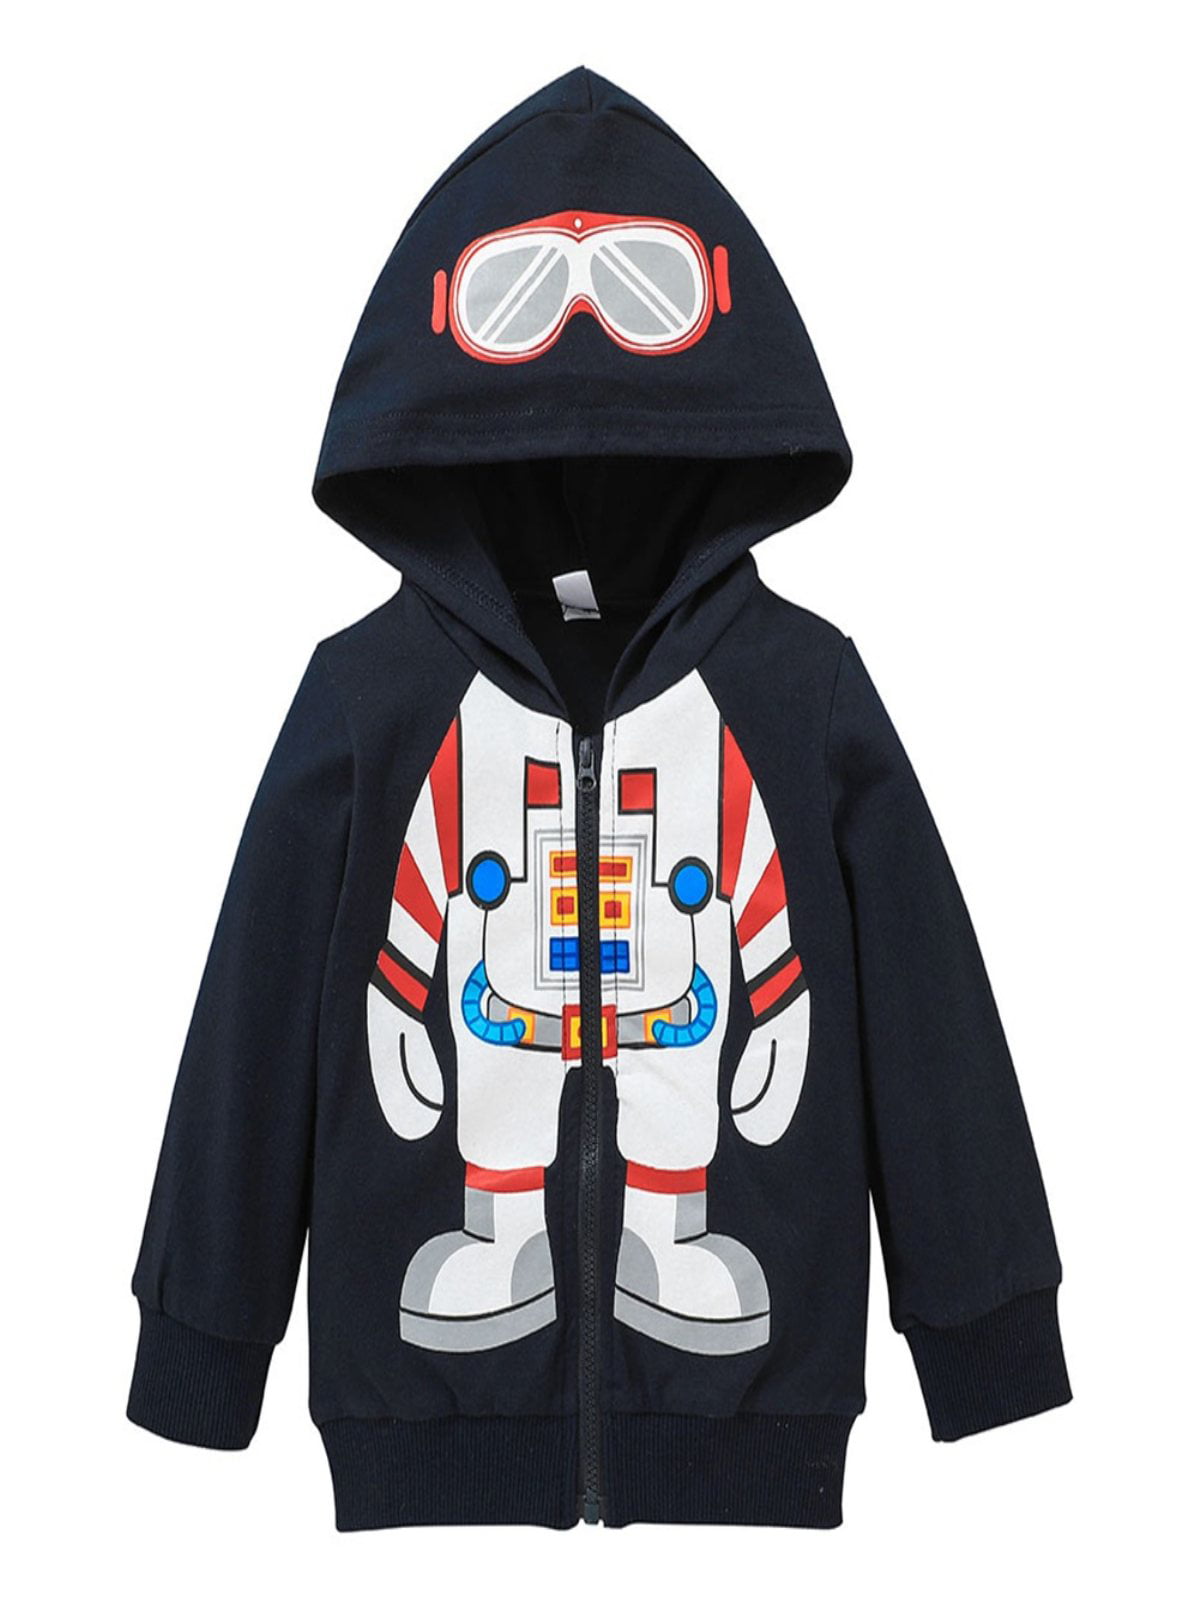 Mens Athletic Fleece Hoodie Astronaut Beauty and Coffee Ultra Soft Plush Winter Pullover Hooded Sweatshirt Festival Gift